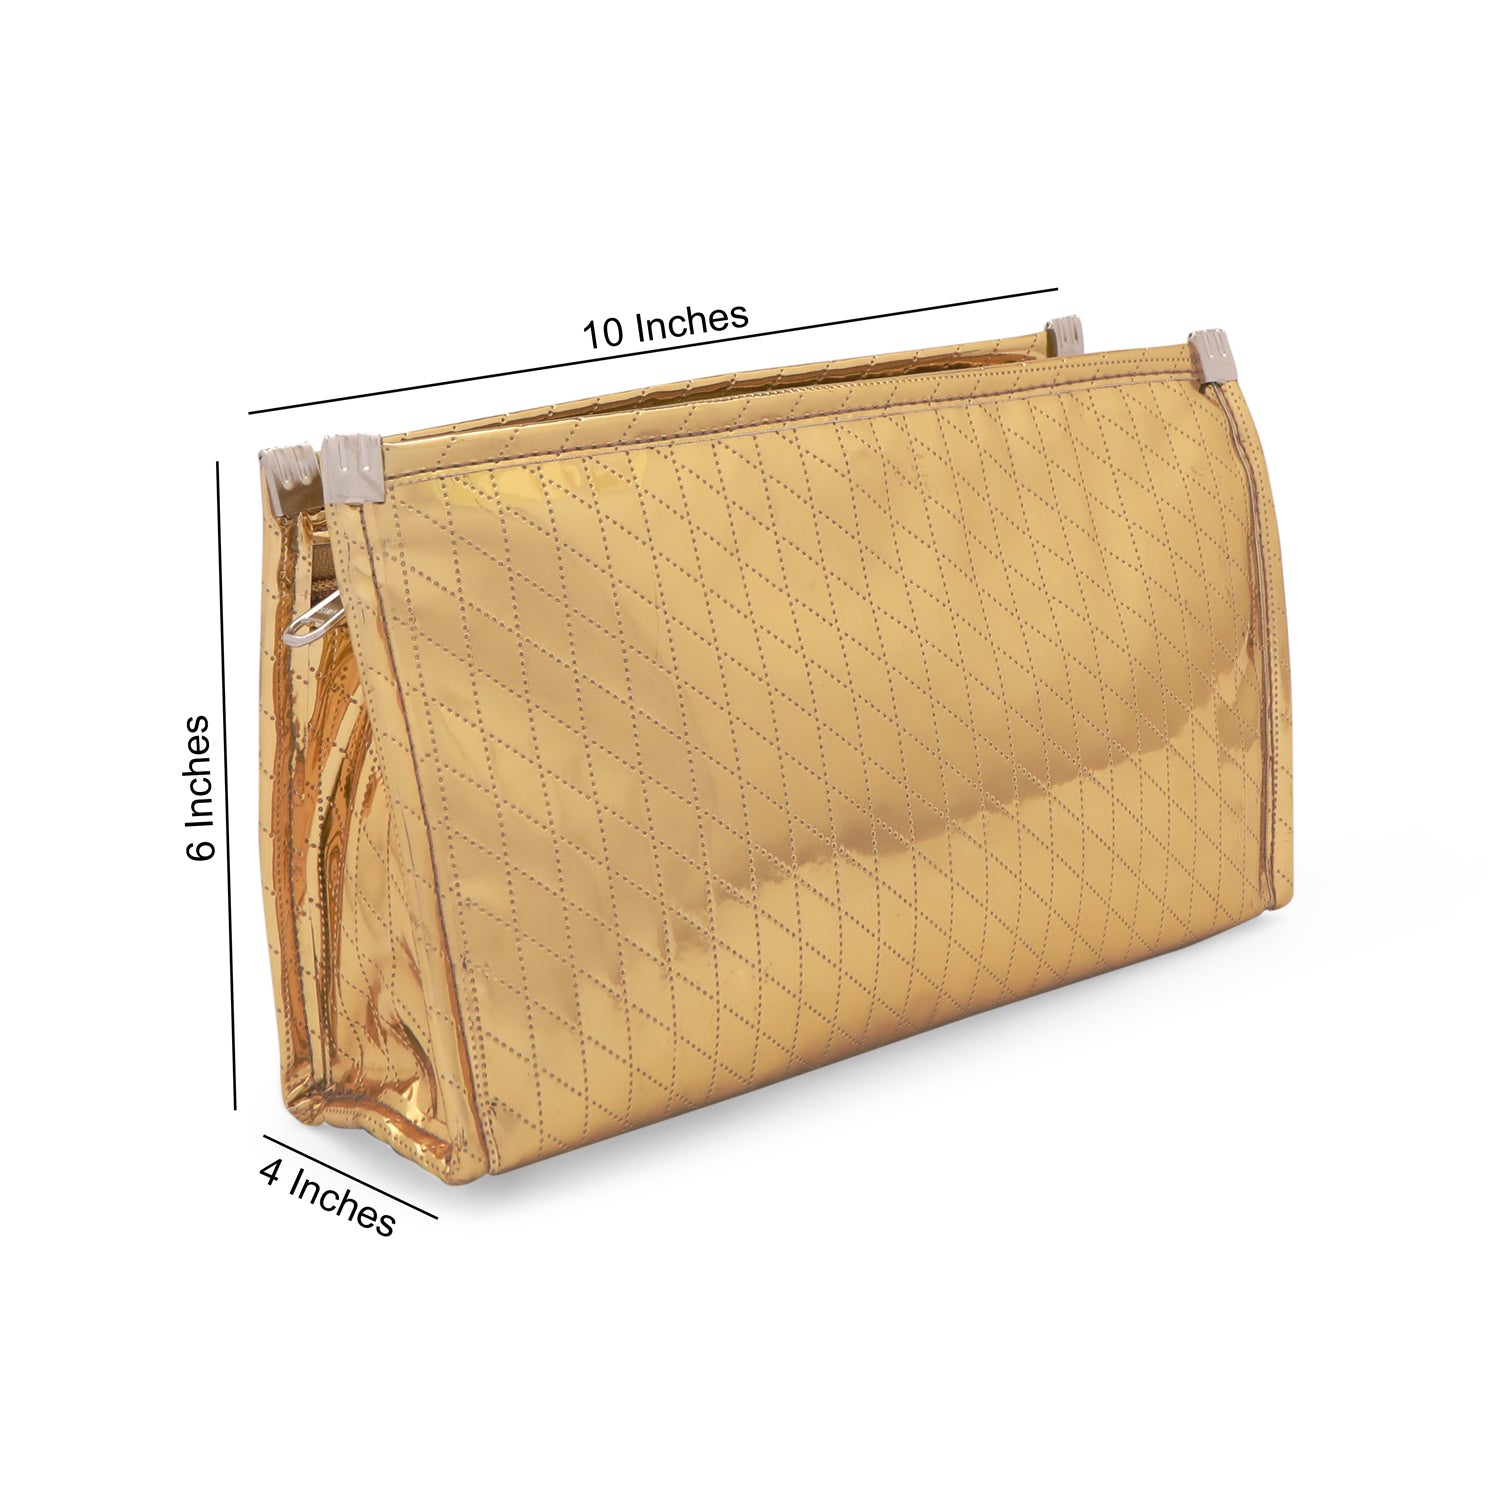 Travel Pouch - Gold 3 Pockets Pouch - Medium (10")